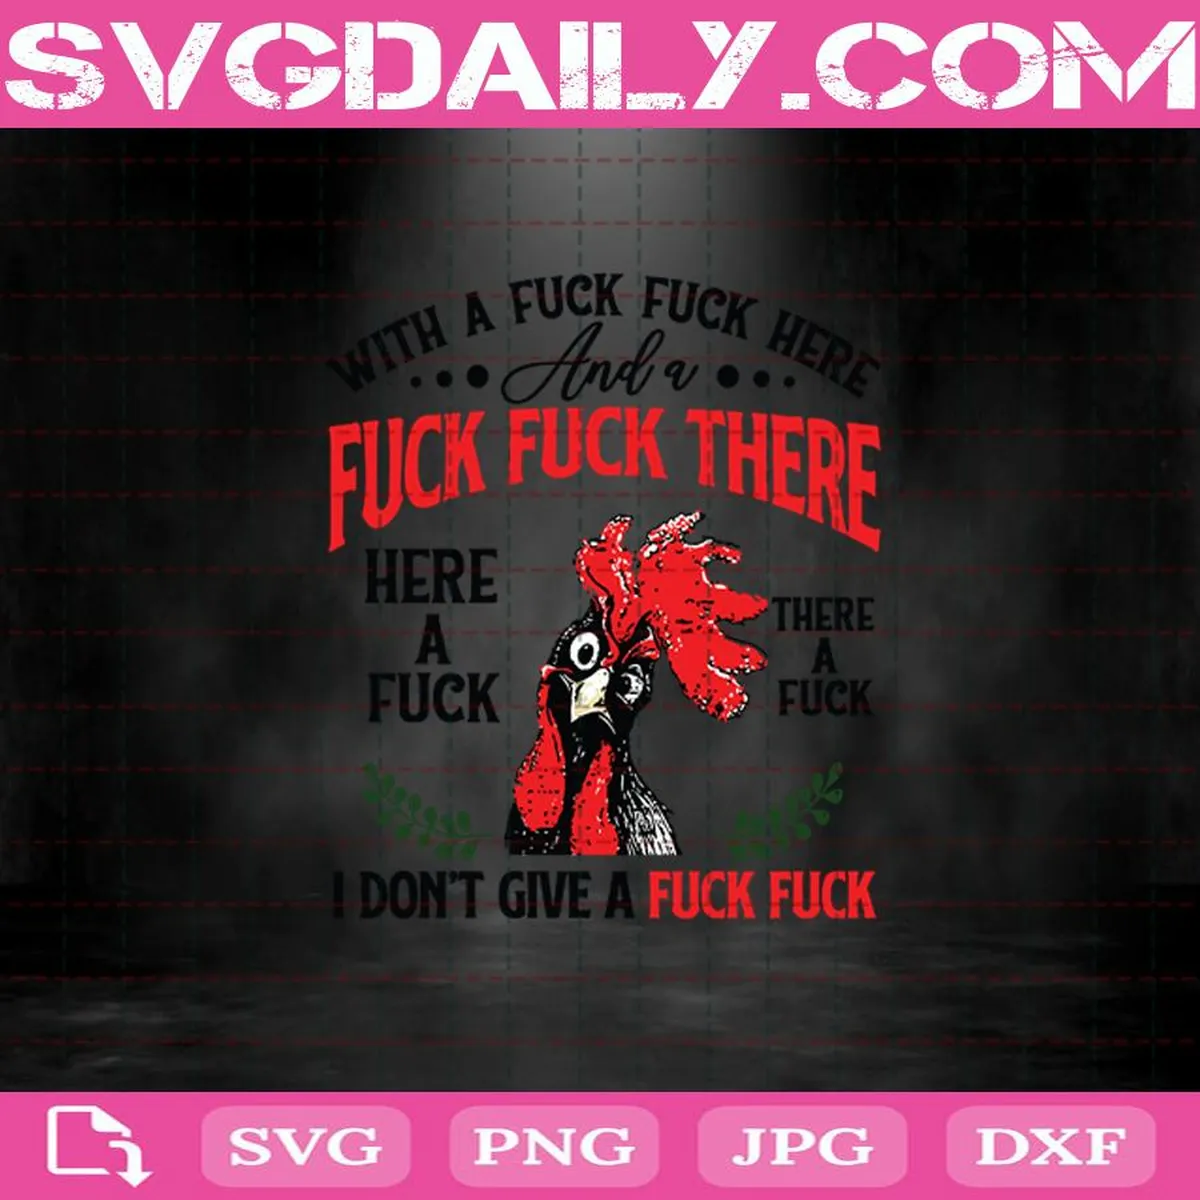 With A Fuck Fuck Here And A Fuck Fuck There Here A Fuck There A Fuck I Don’t Give A Fuck Fuck Chicken Svg